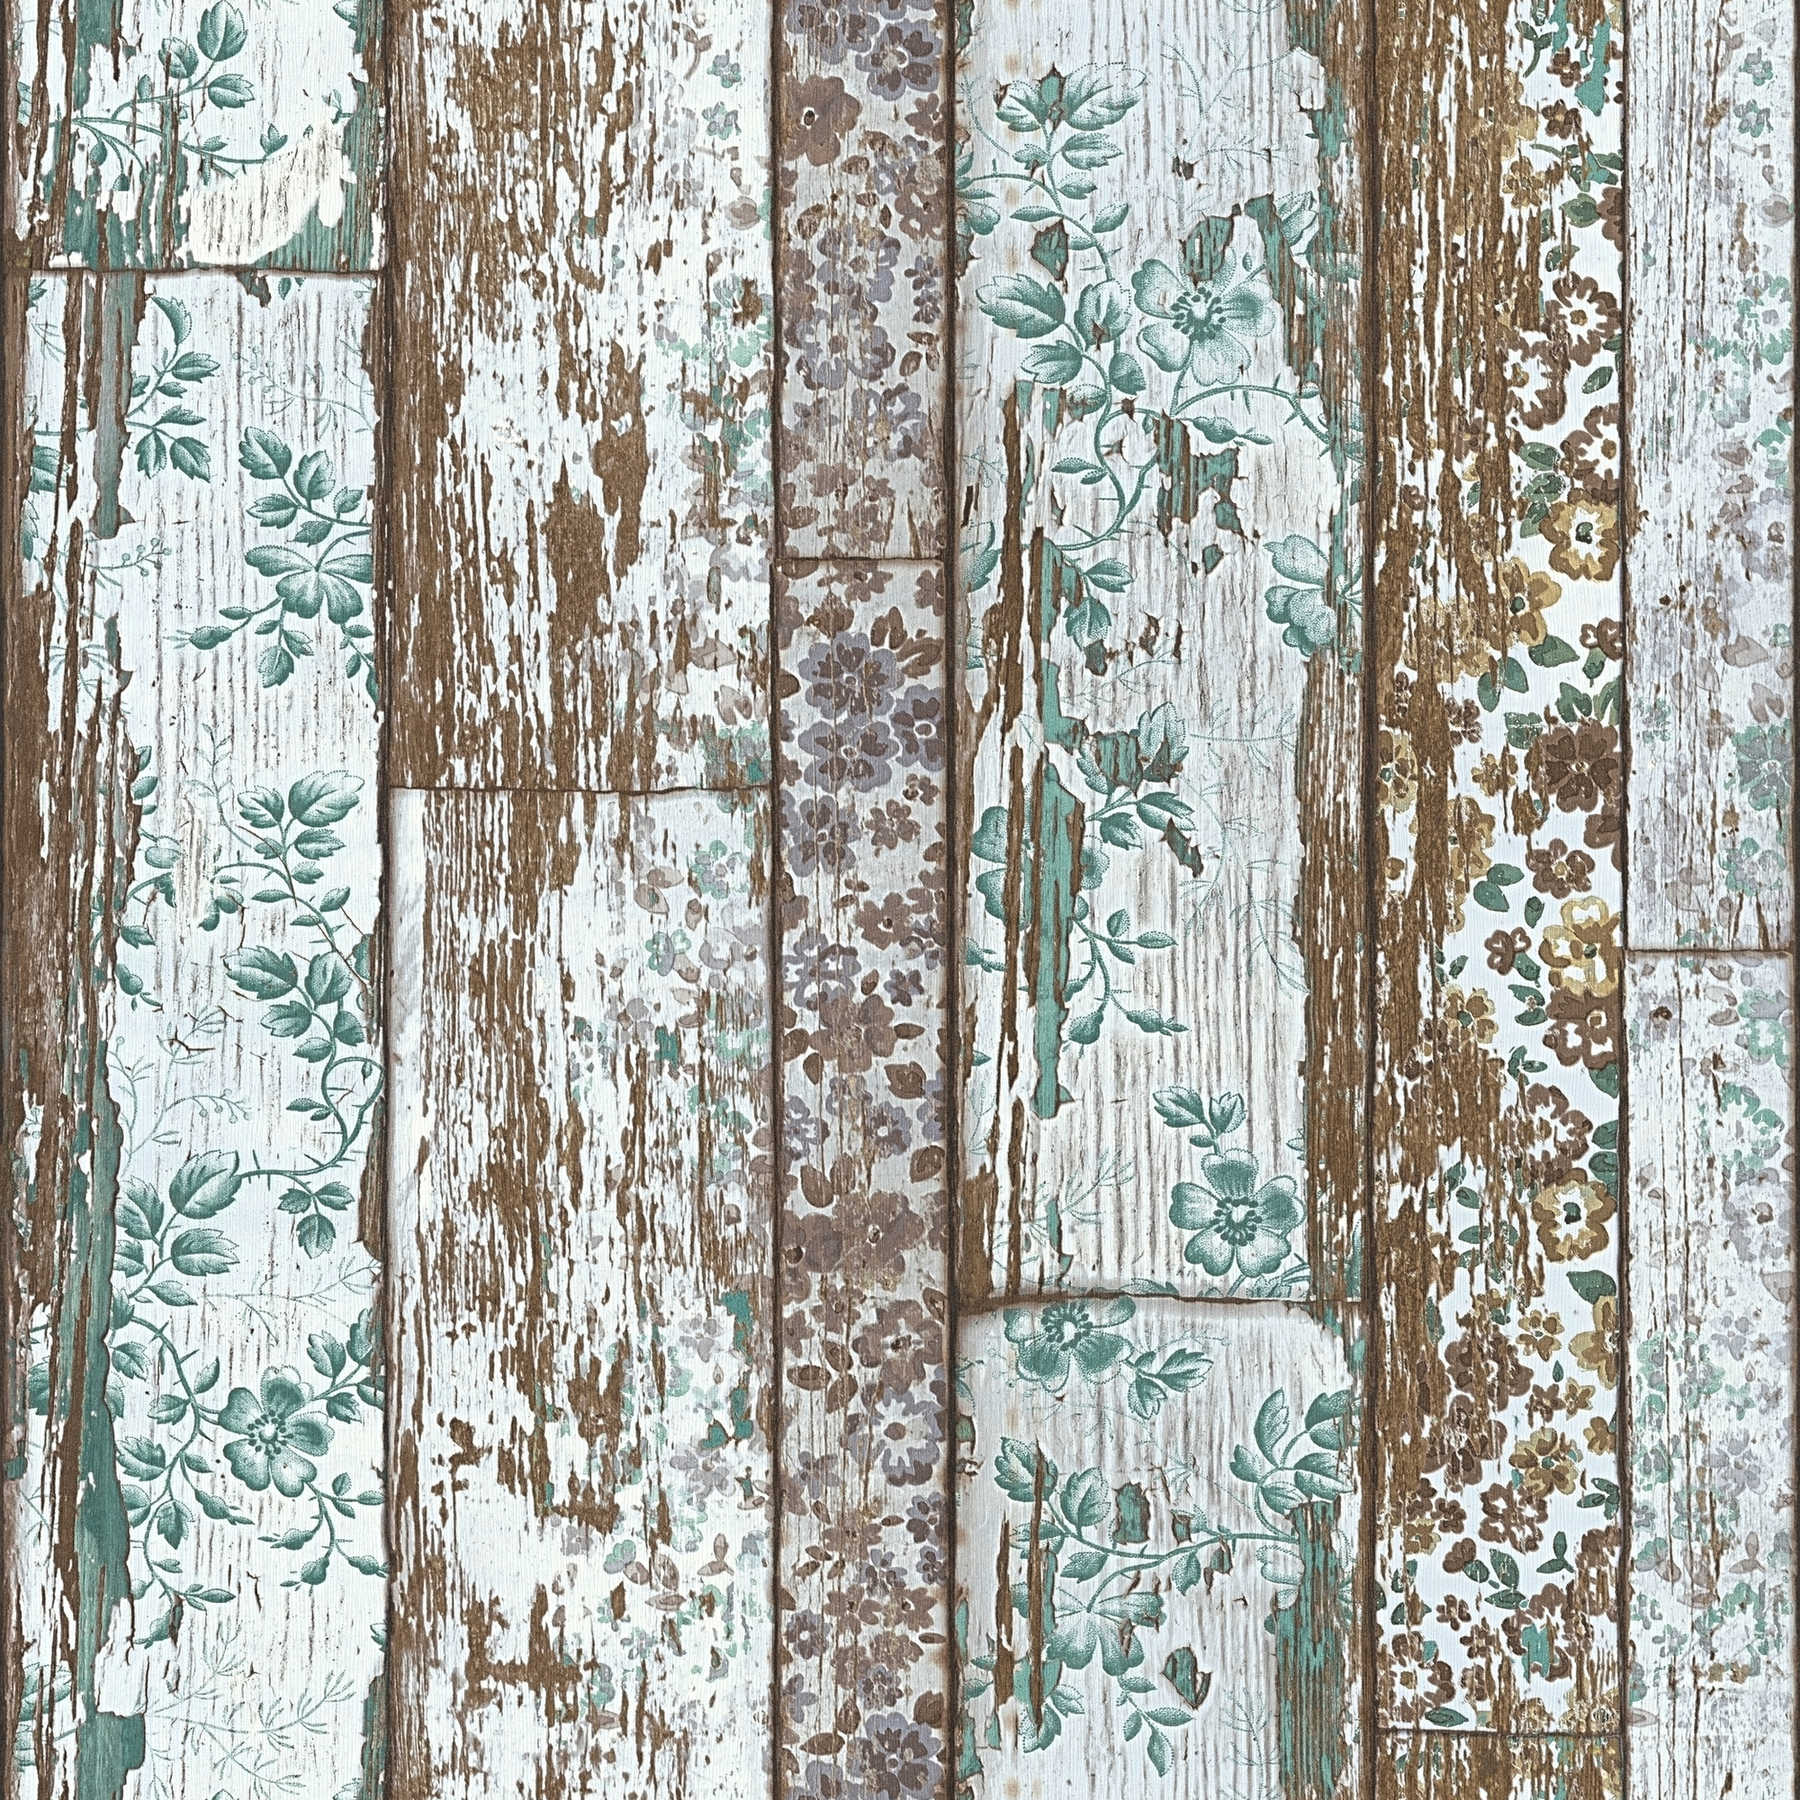 Country house wallpaper plank look with vintage floral print - green, brown, grey
